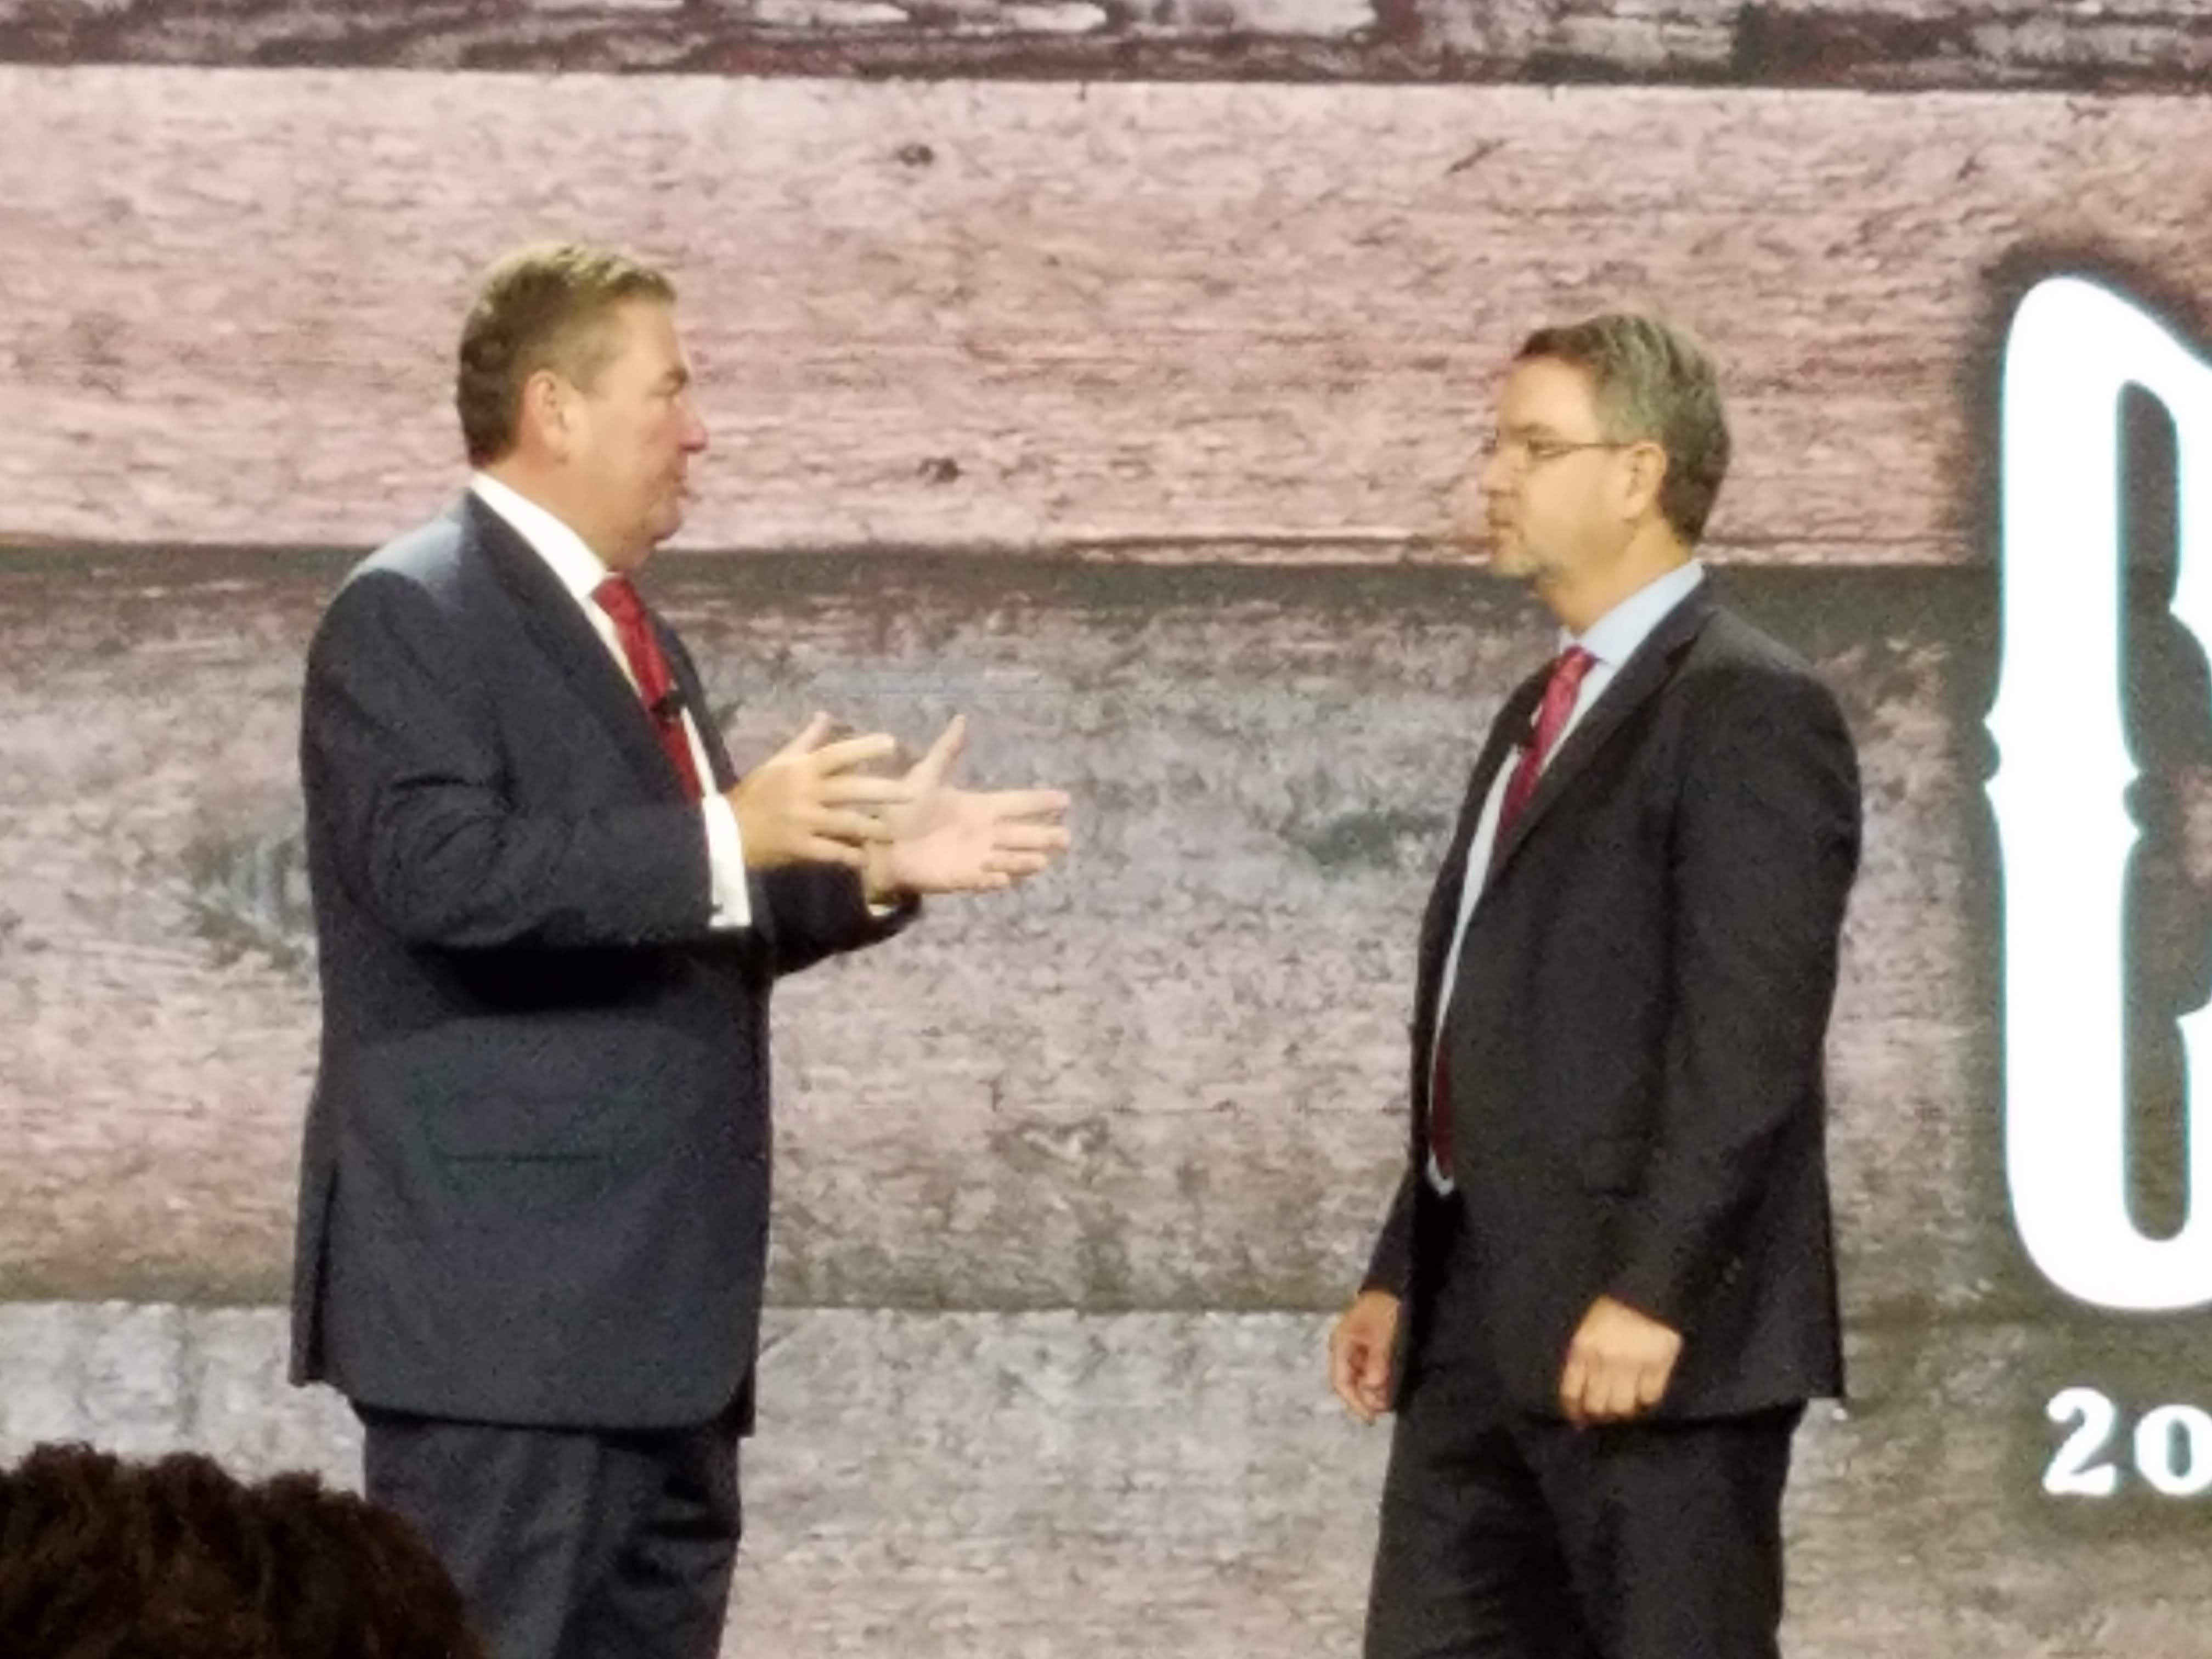 Red Roof Chief Development Officer Phil Hugh and President Andrew Alexander talk on the stage of the Gaylord Opryland